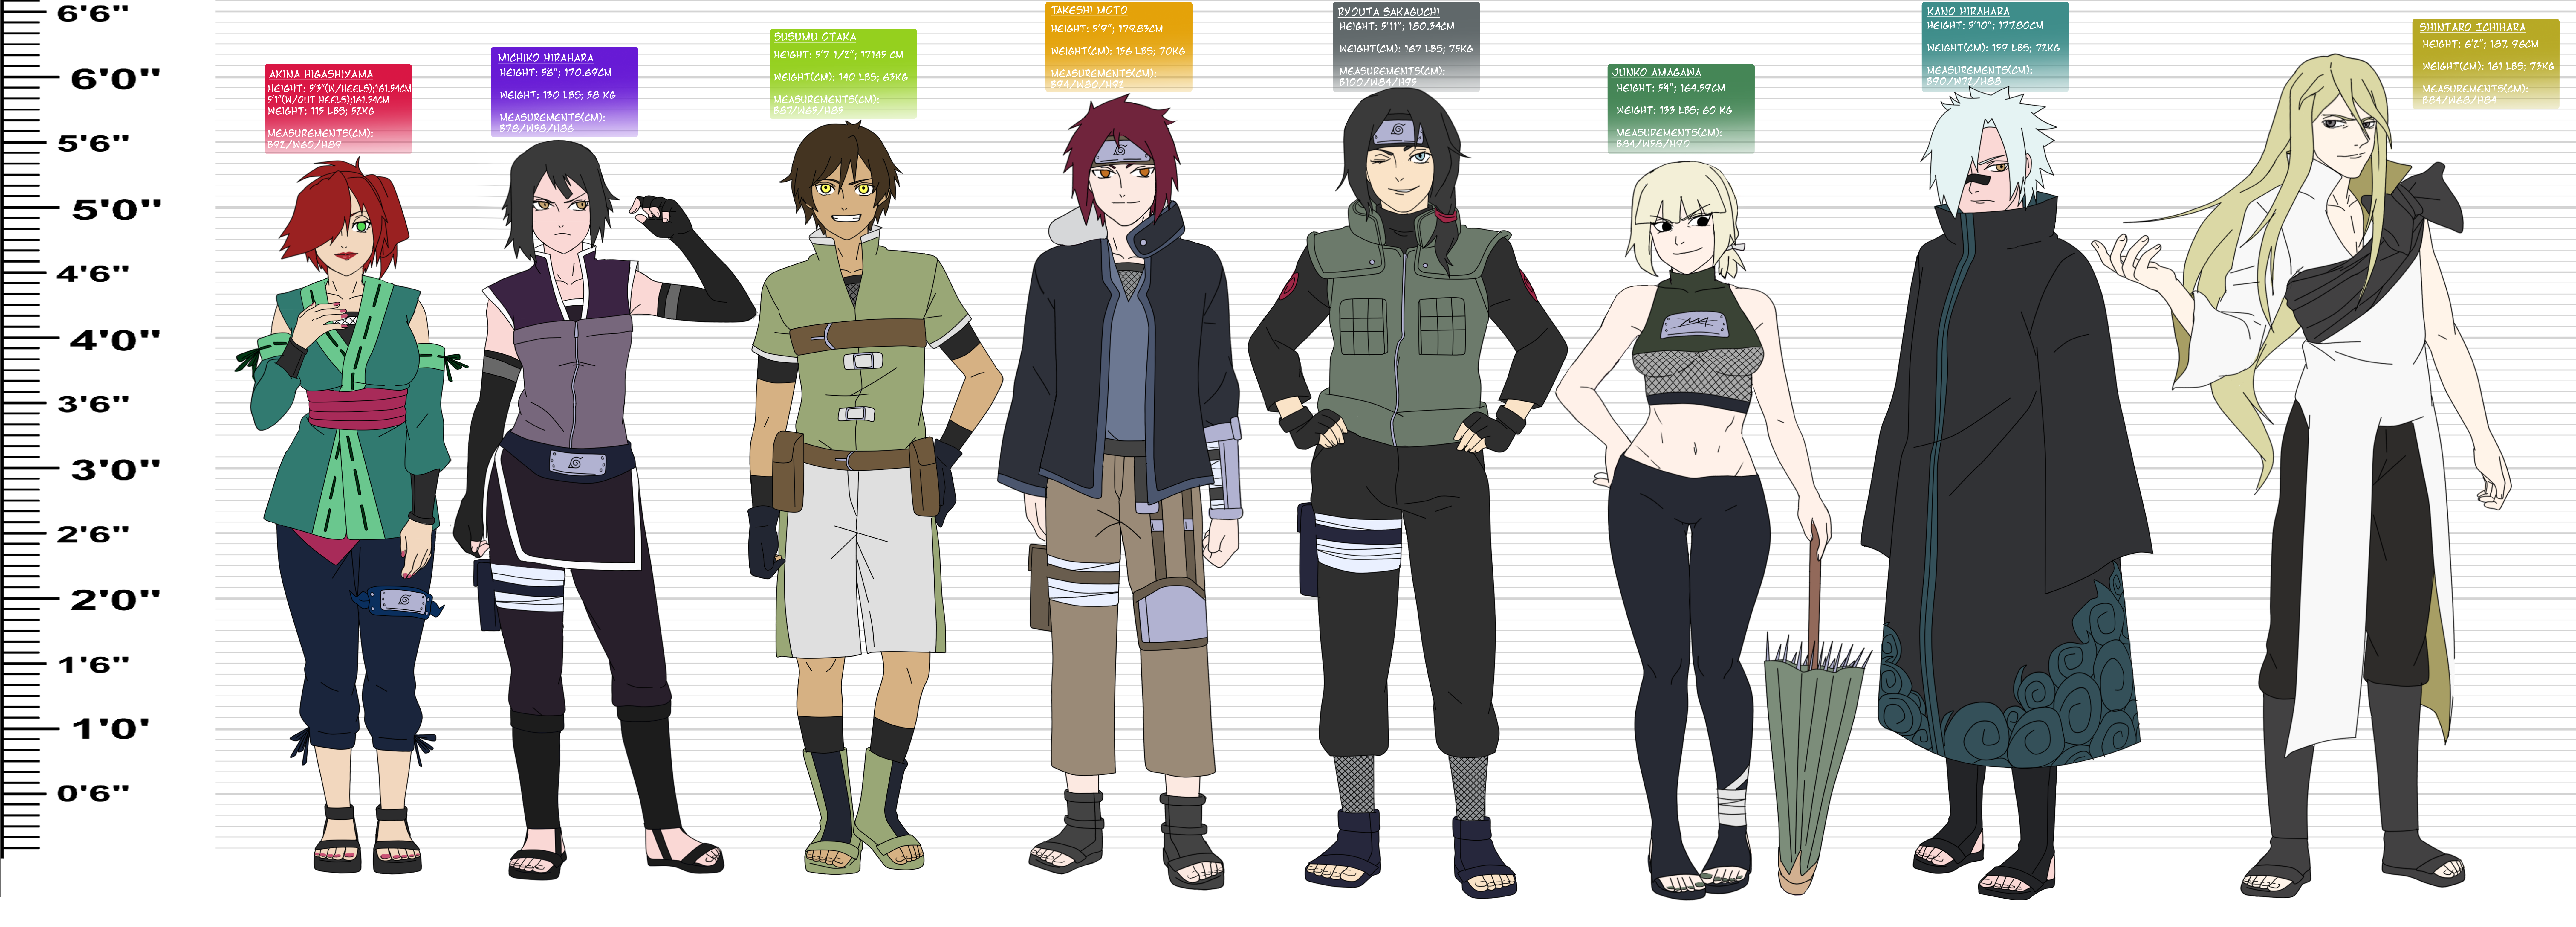 HEIGHTS OF NARUTO SHIPPUDEN CHARACTERS - HEIGHT COMPARISON OF ALL